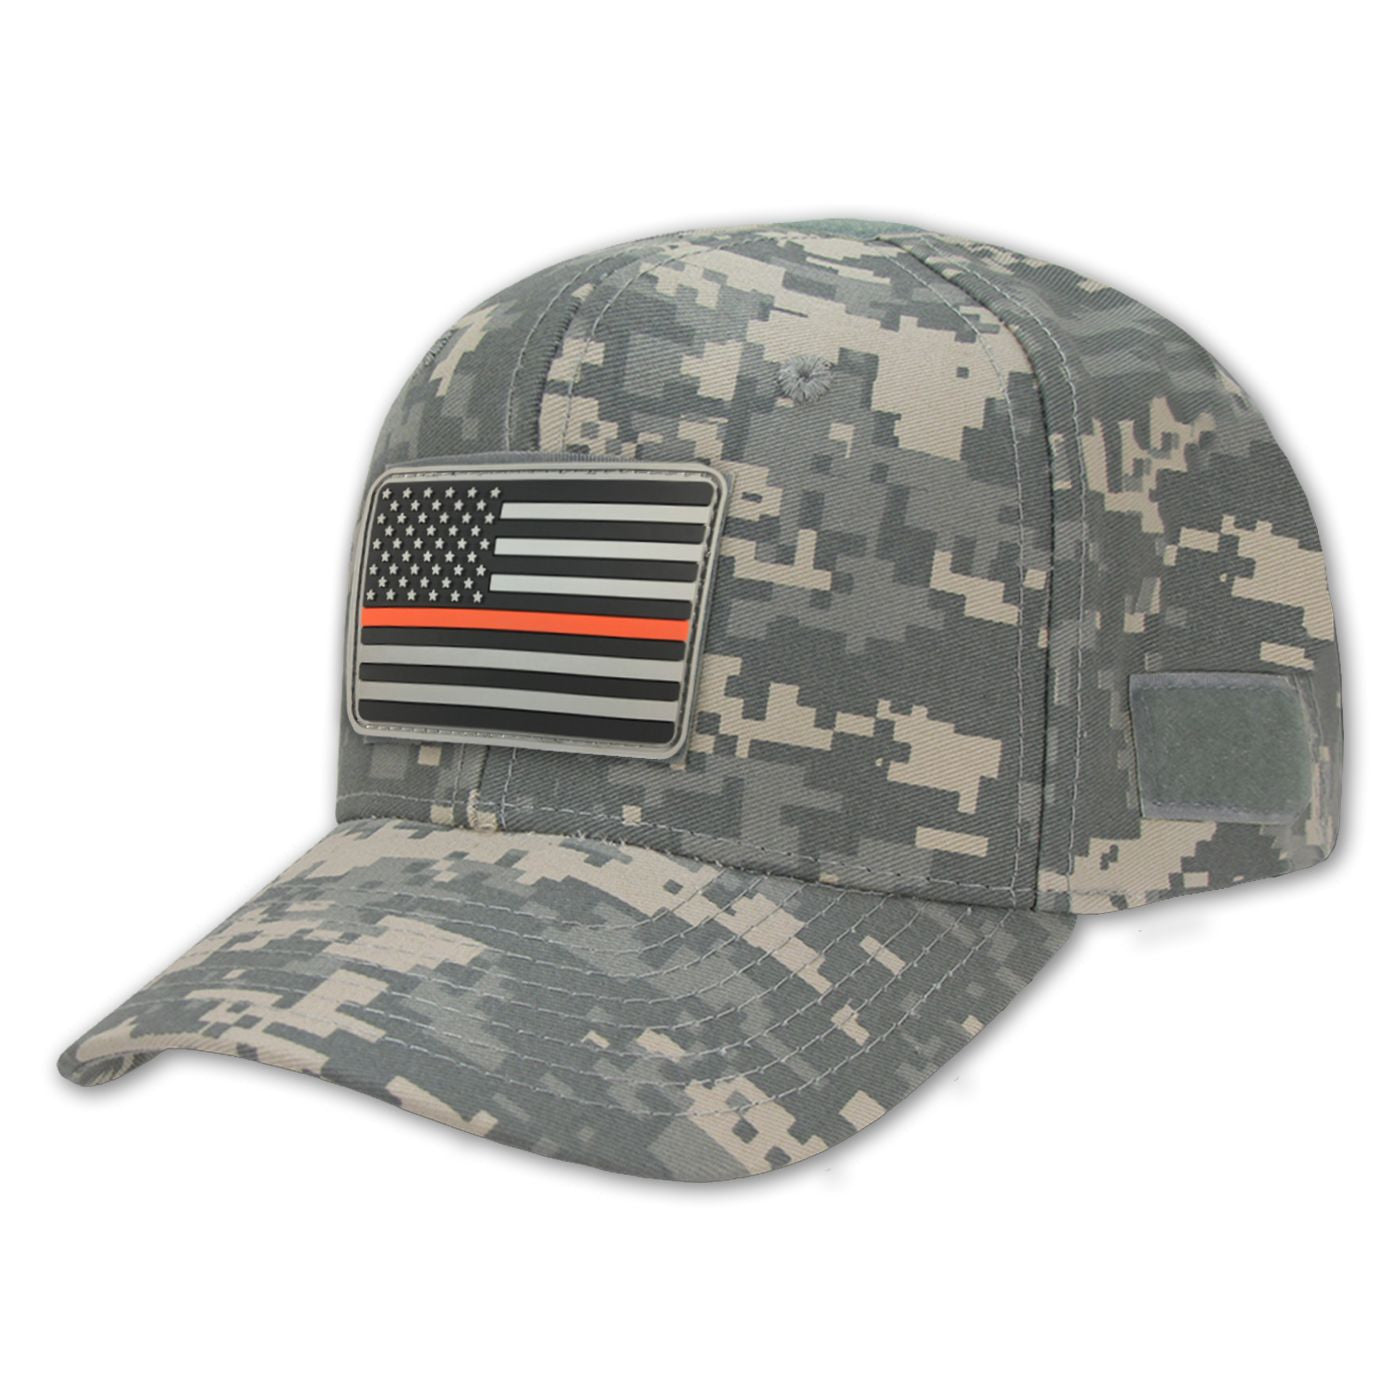 Camo Operator's Hat & Thin Red Line Morale Patch - Thin Blue Line USA